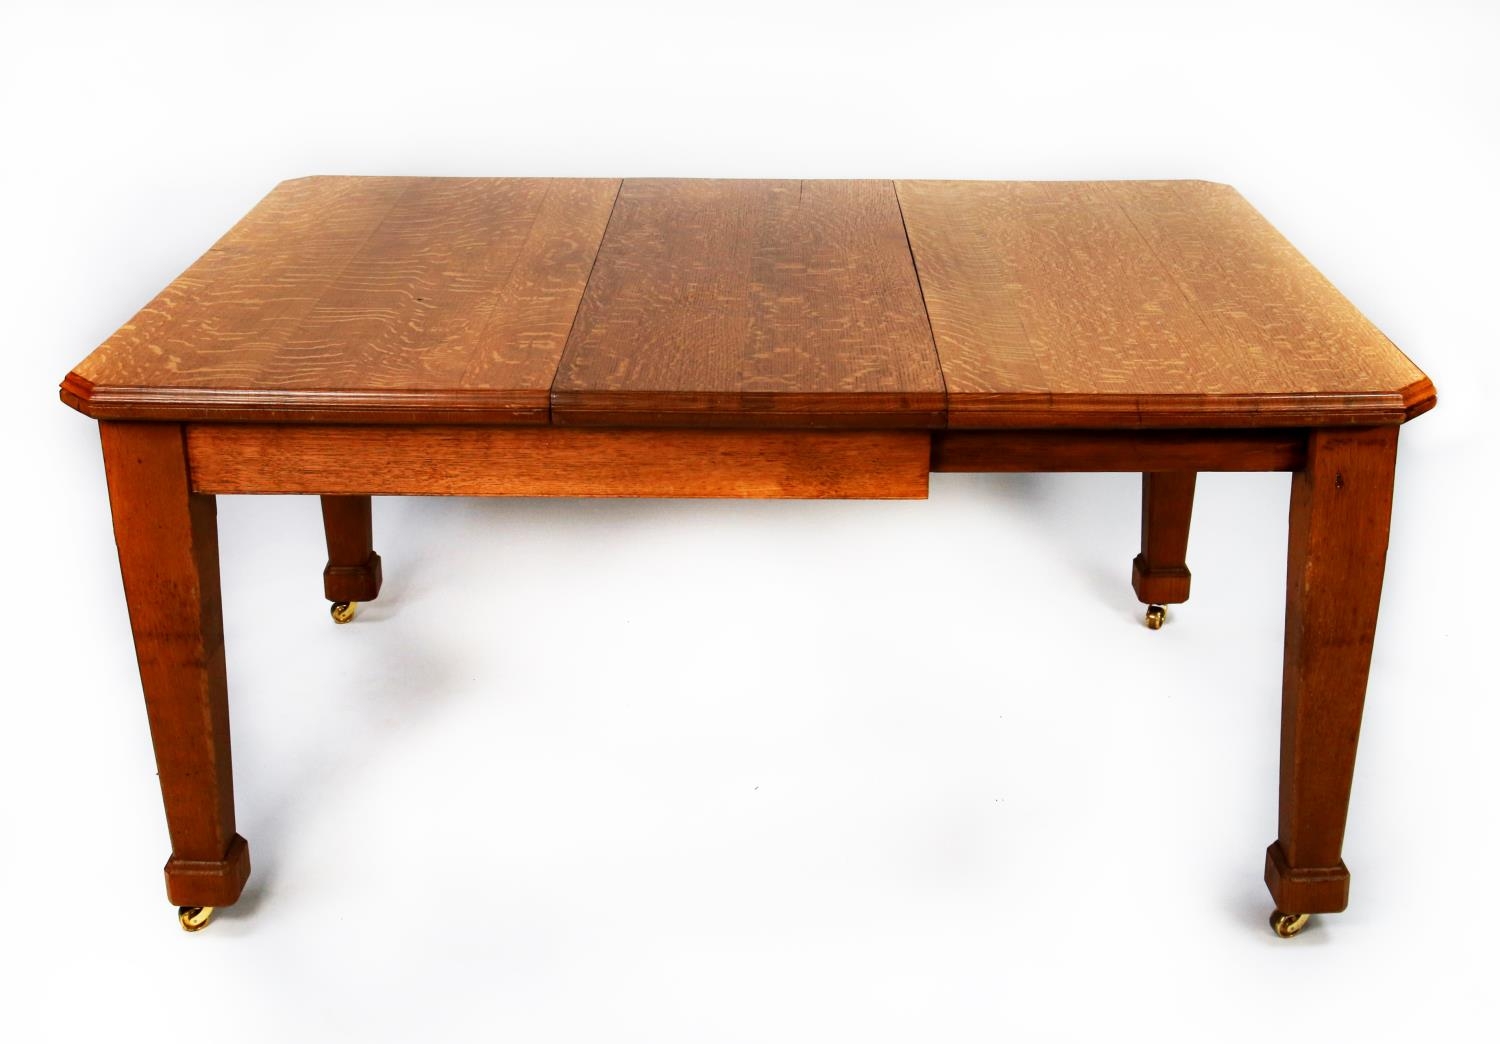 EARLY TWENTIETH CENTURY ARTS AND CRAFTS LIGHT OAK WIND-OUT EXTENDING DINING TABLE WITH ADDITIONAL